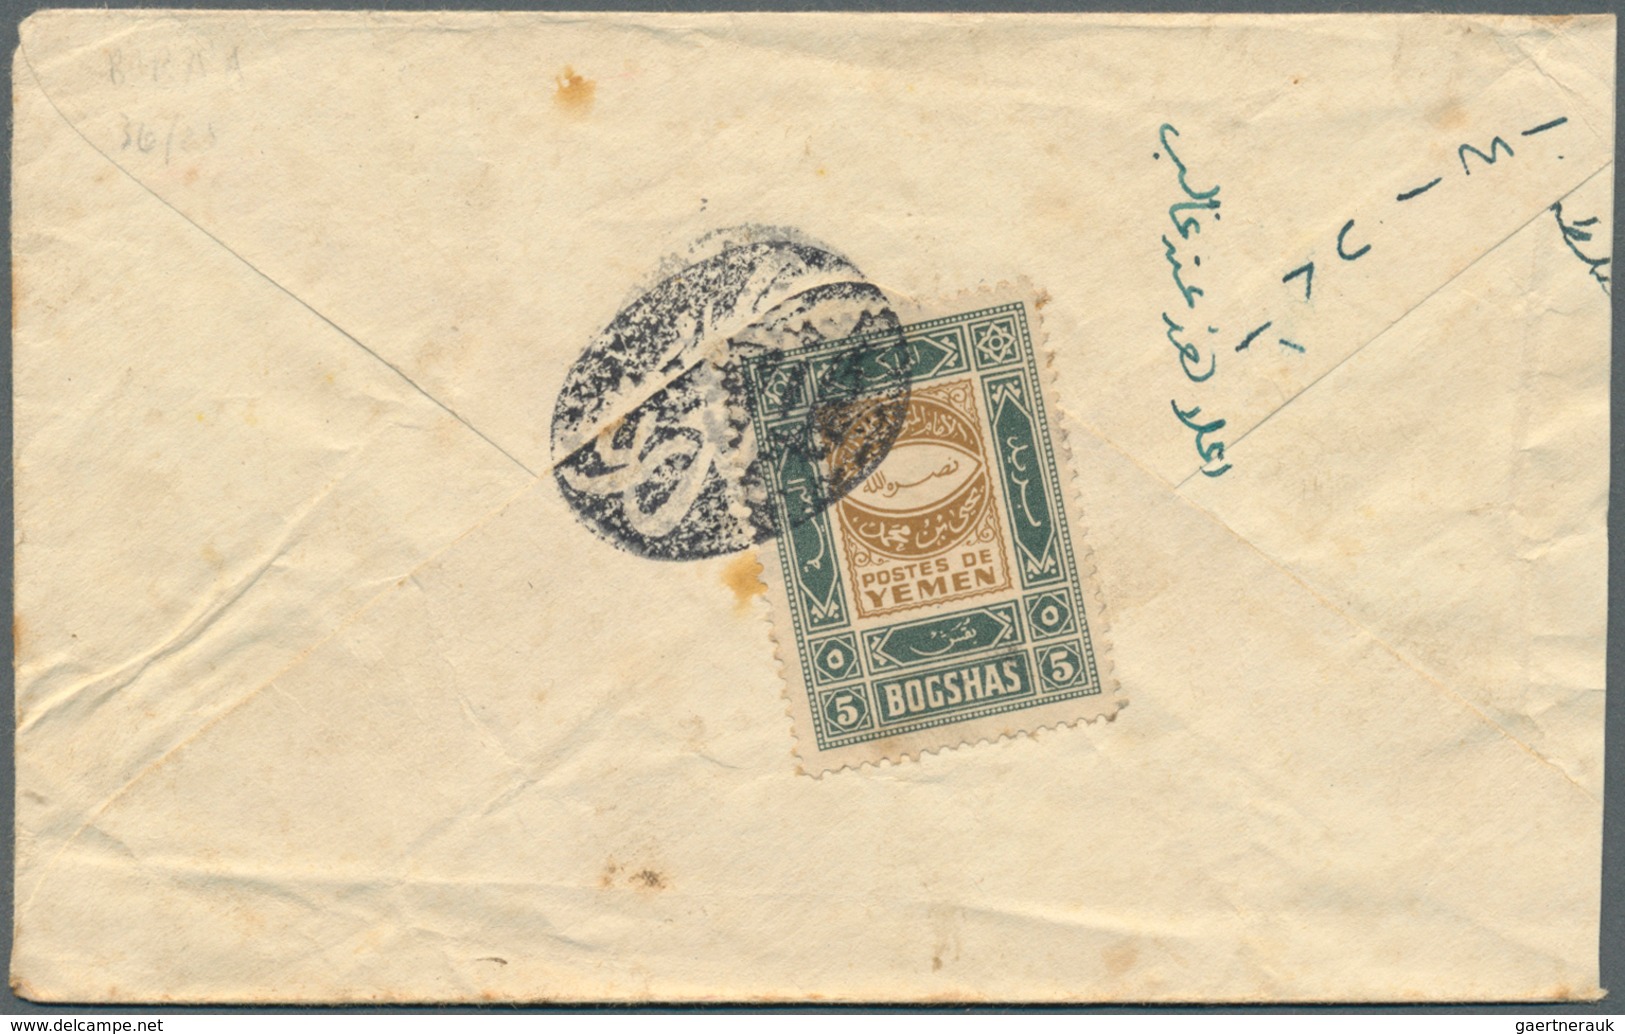 23020 Jemen: 1950/1965 (ca.), assortment of 55 covers, apparently mainly commercial mail (postal wear/impe